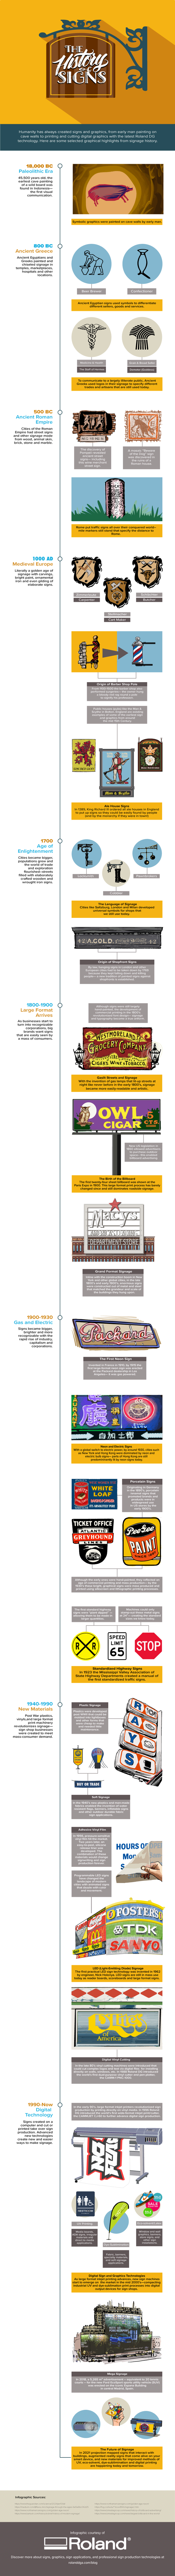 History of sign industry